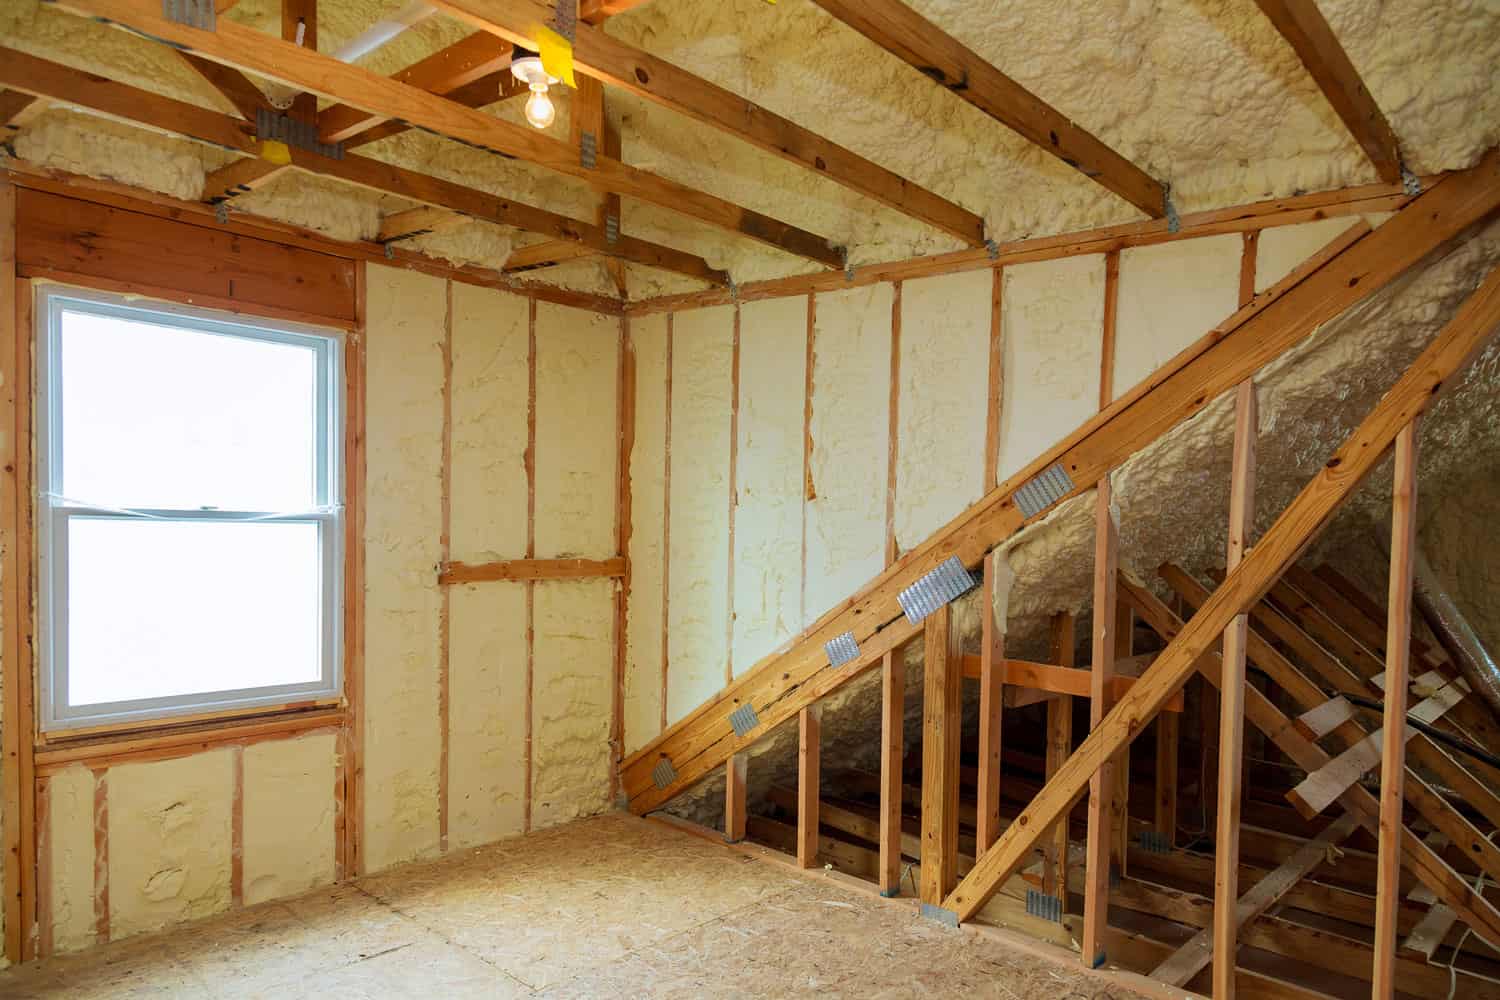 A room at a newly constructed home is sprayed with liquid insulating foam, How To Insulate Existing Interior Walls